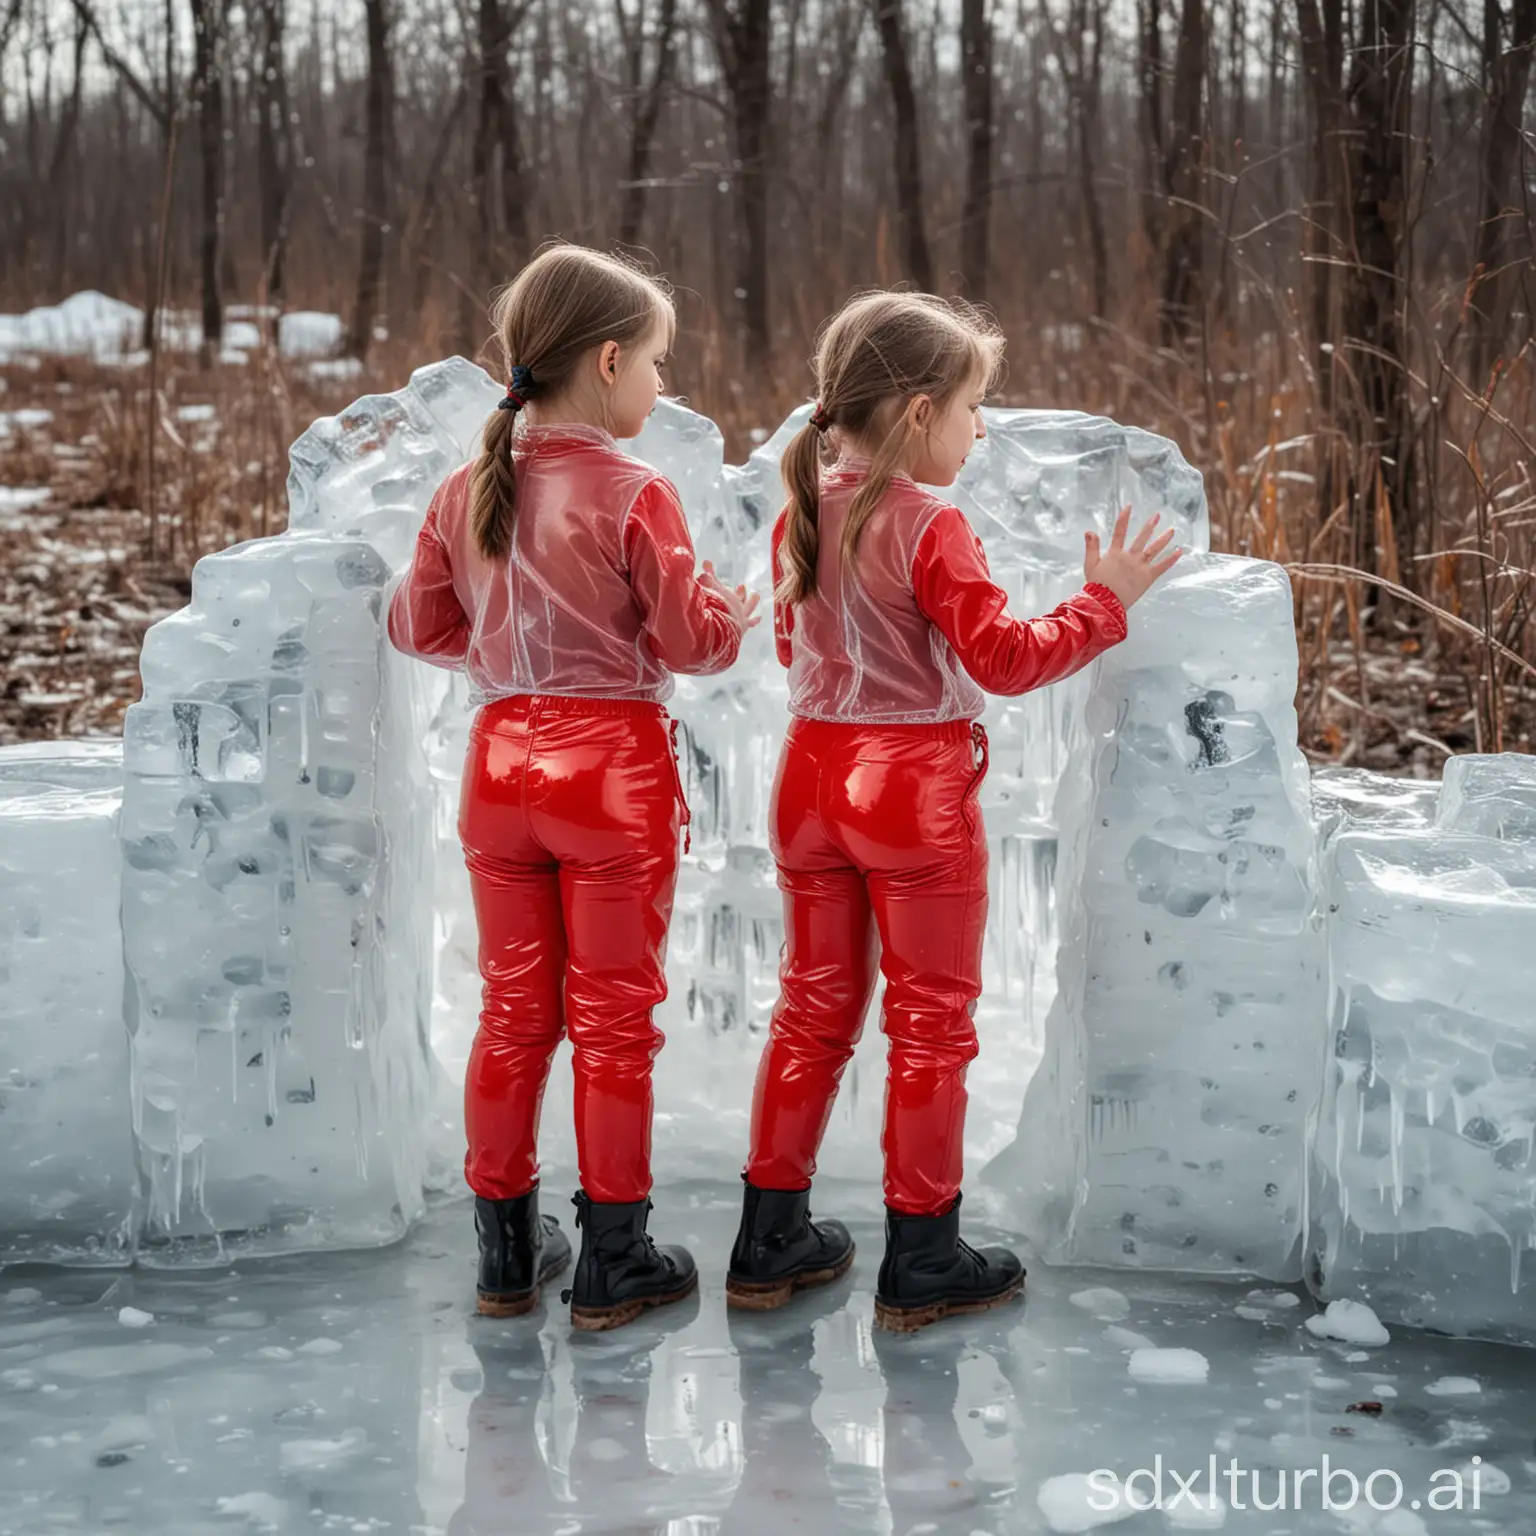 children girls in very tight red latex pants back frozen in a block of ice